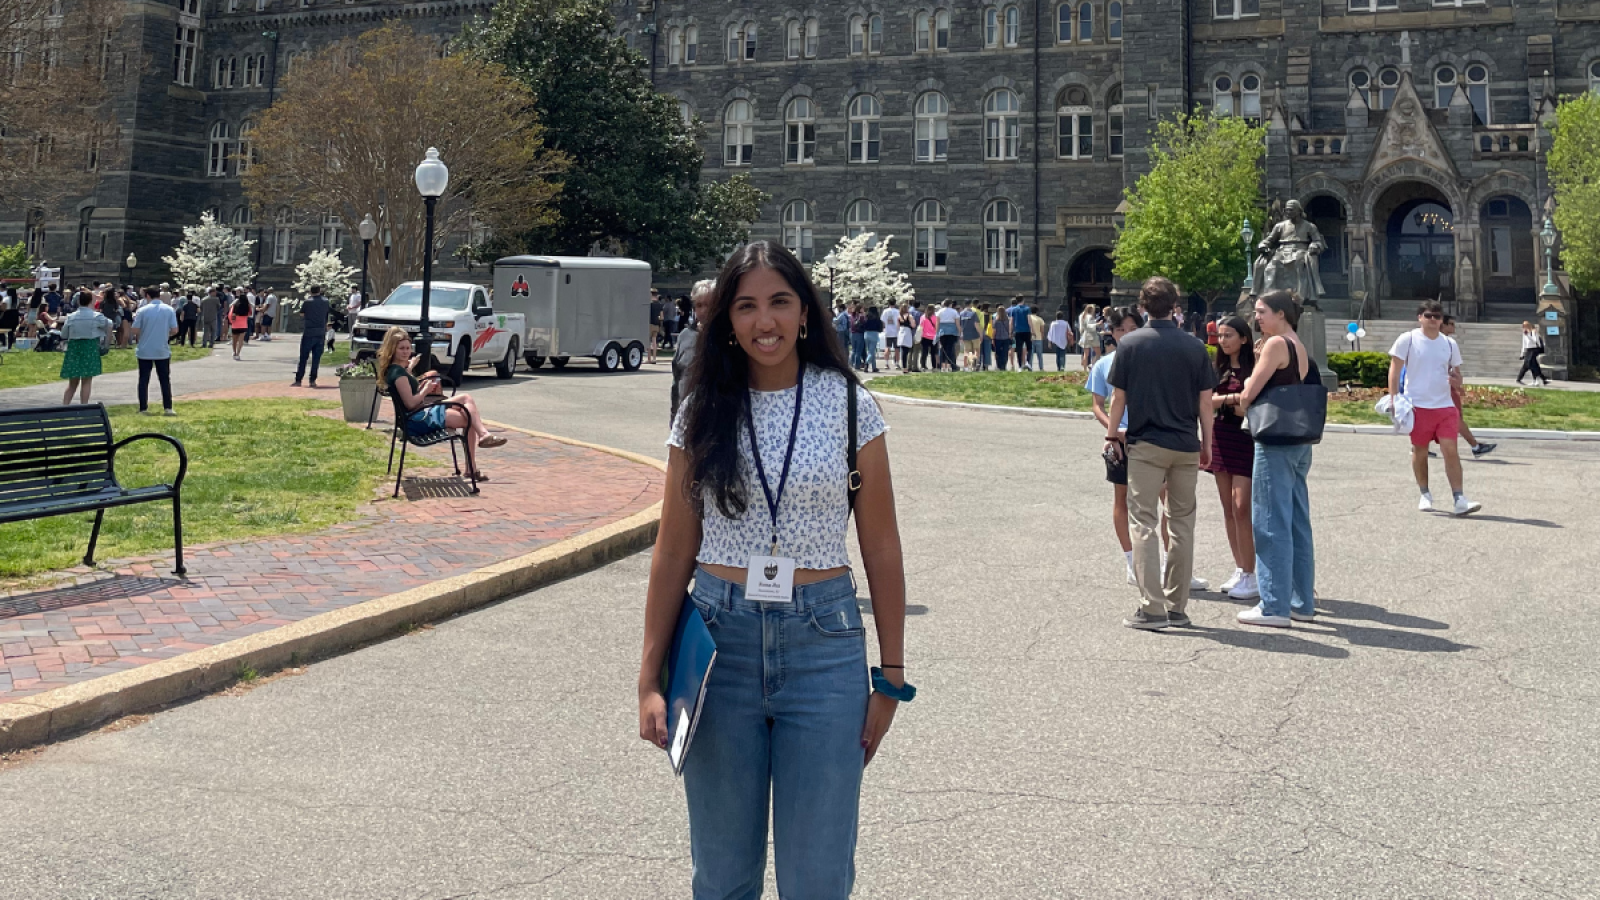 An image of Roma Jha, an incoming student, wearing a T-shirt and jeans and standing in front of Healy Hall, a historic building on Georgetown's campus.